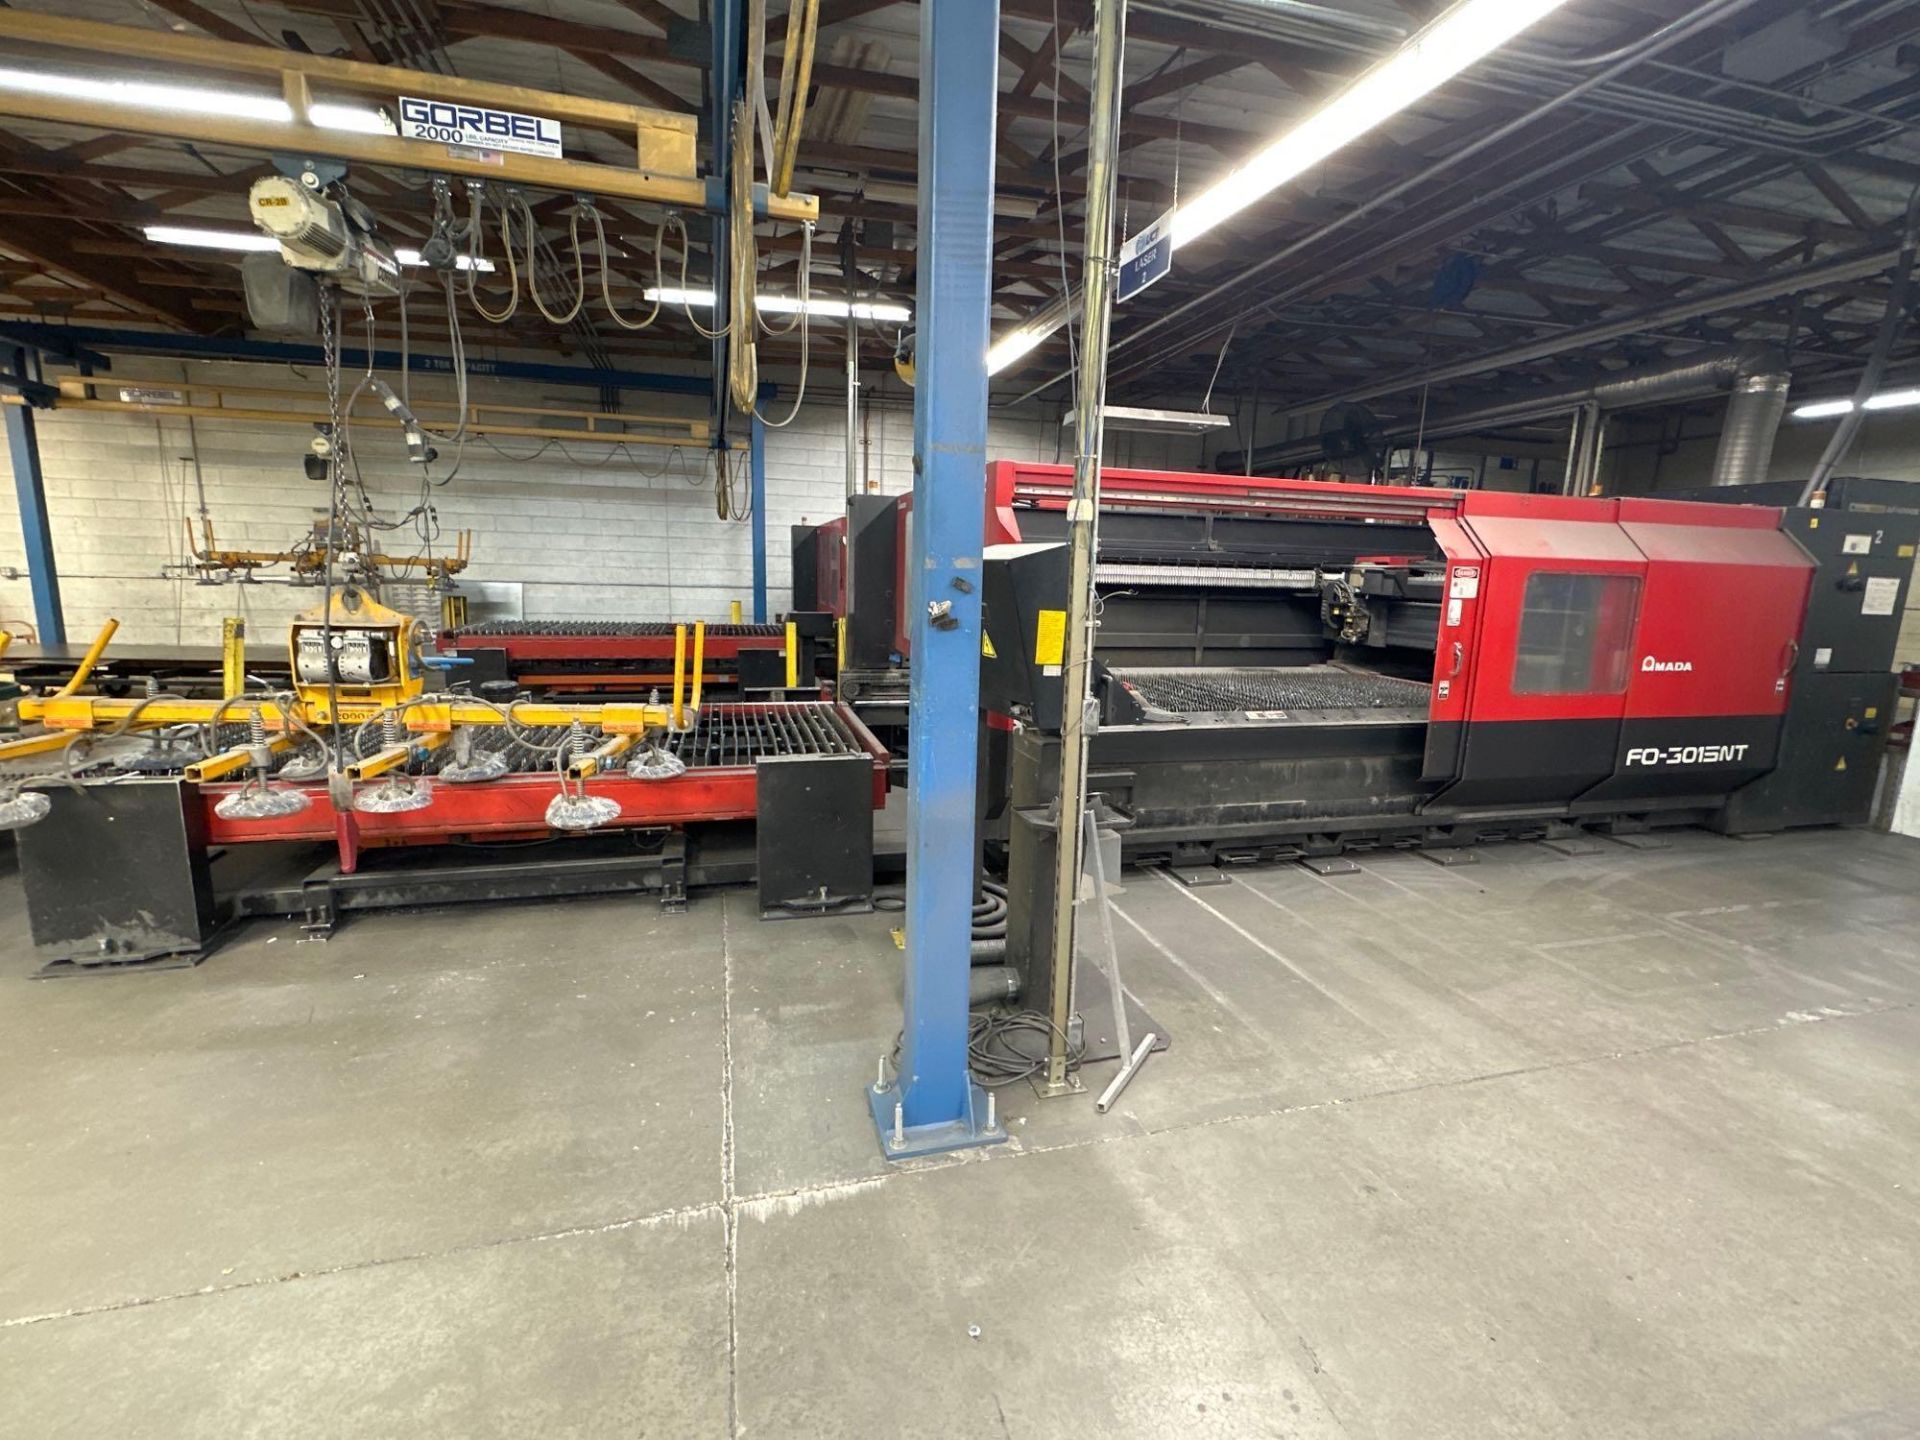 4000W AMADA FO-3015NT CO2 LASER, 2005 - 5' X 10' TABLE - INCLUDES DONALDSON TORIT DUST COLLECTOR